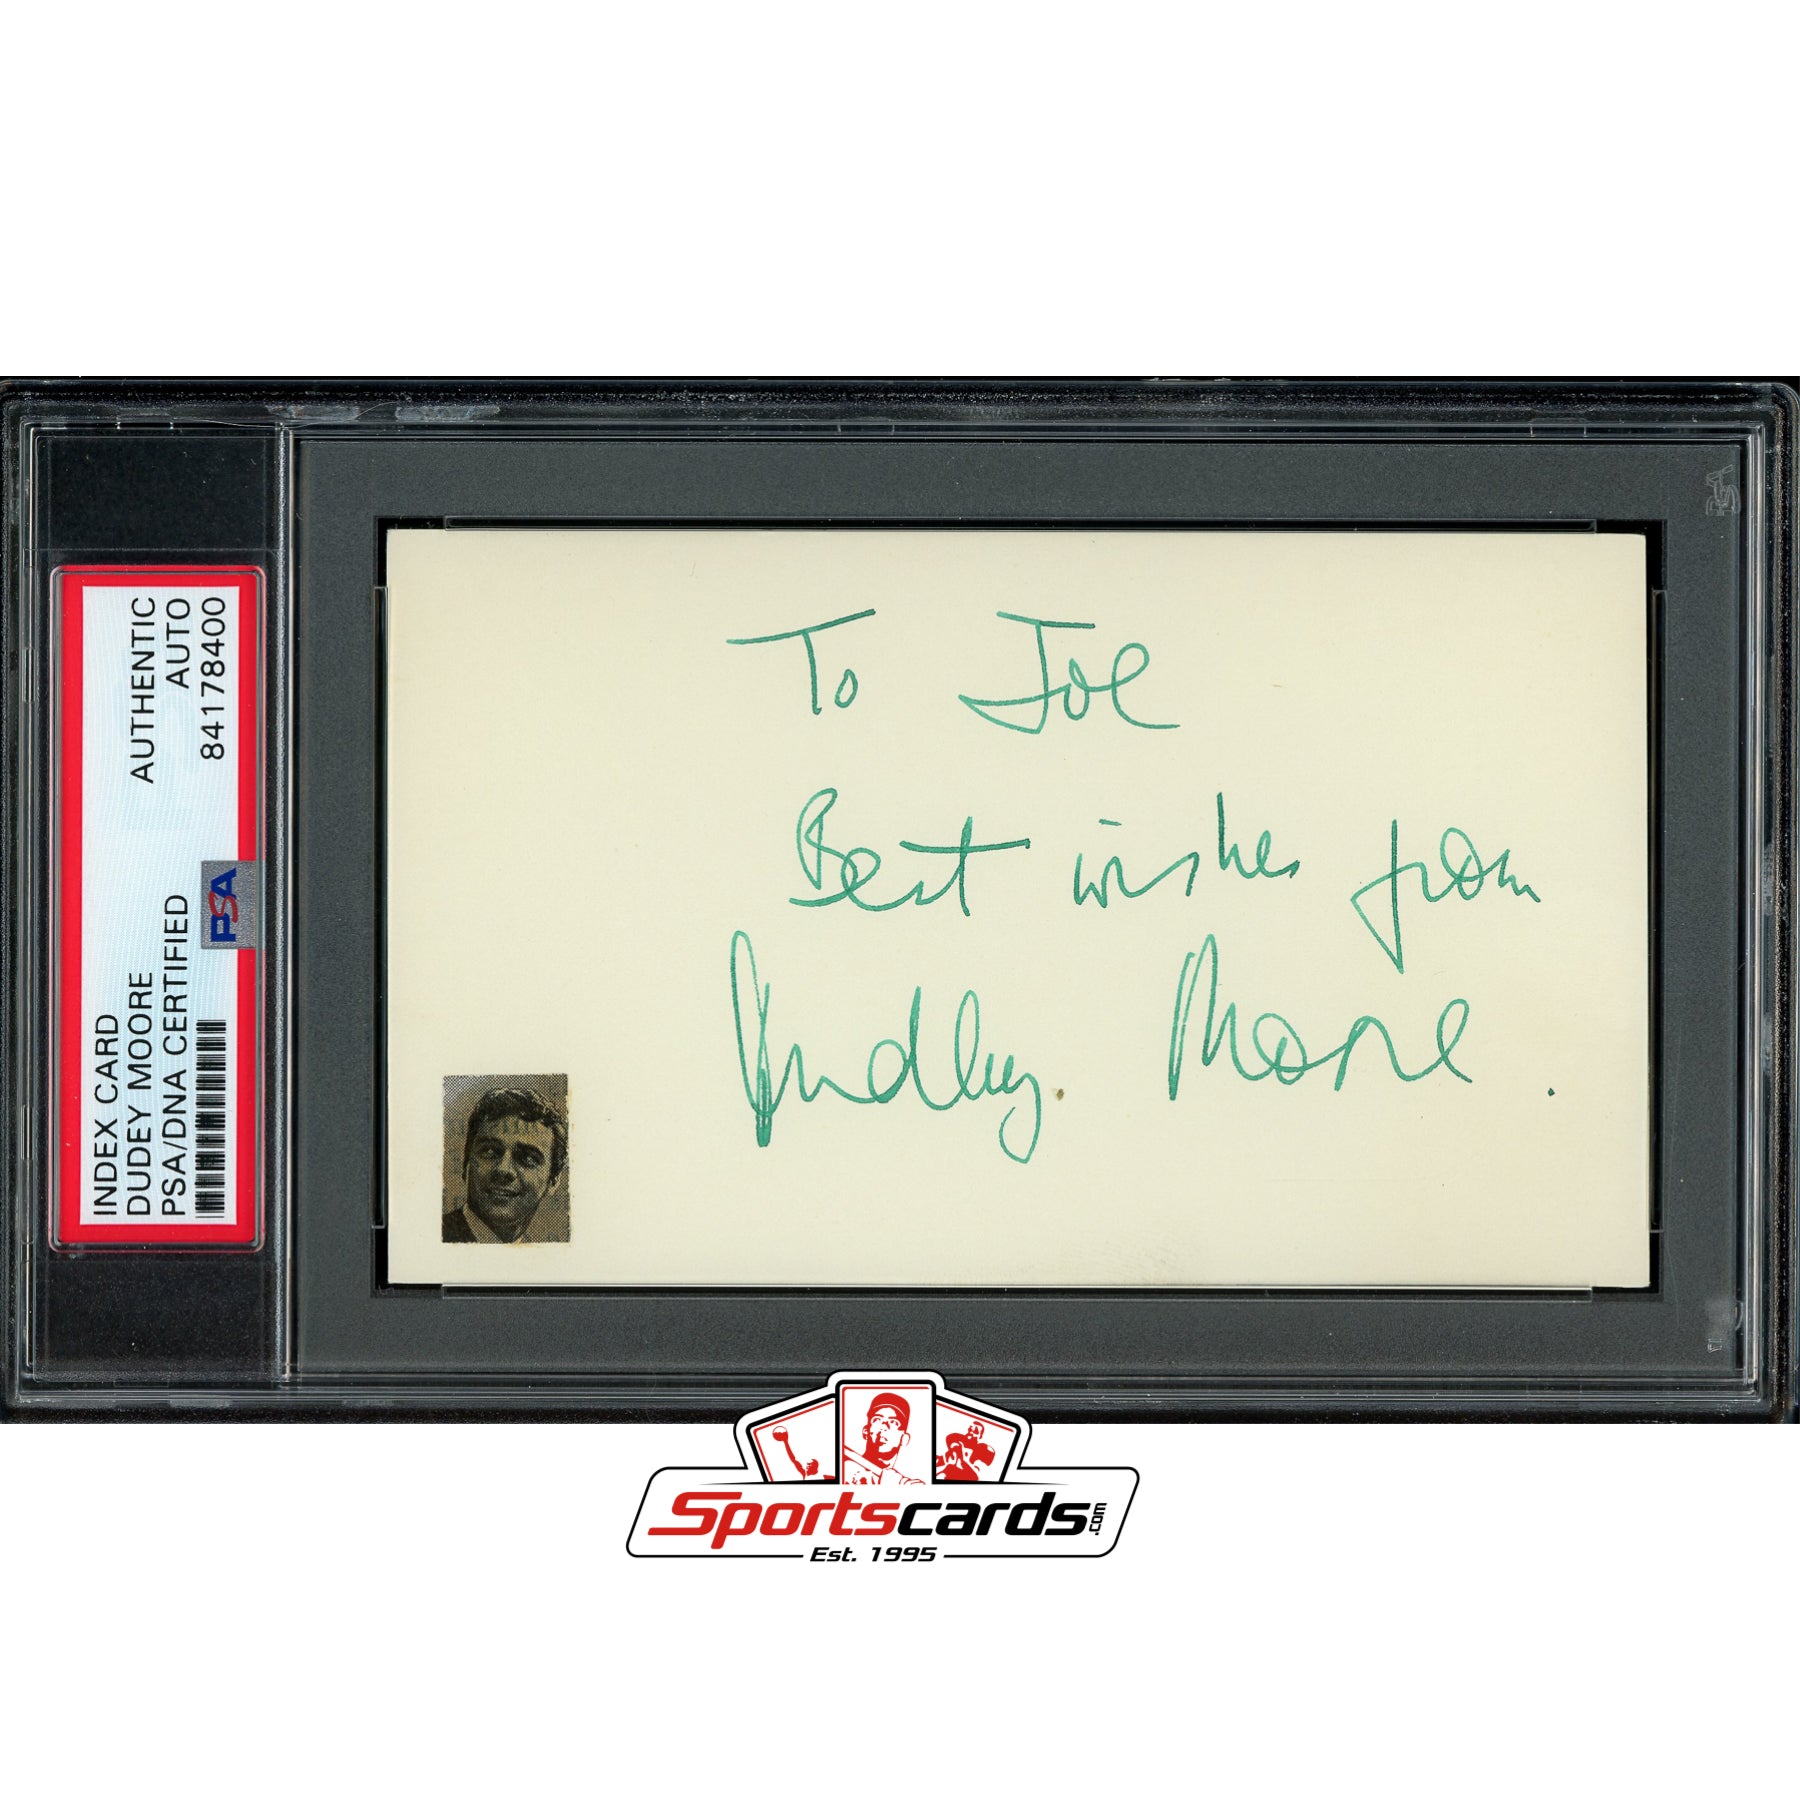 Dudley Moore (d.2002) Signed Auto 3x5 Index Card PSA/DNA Actor Arthur